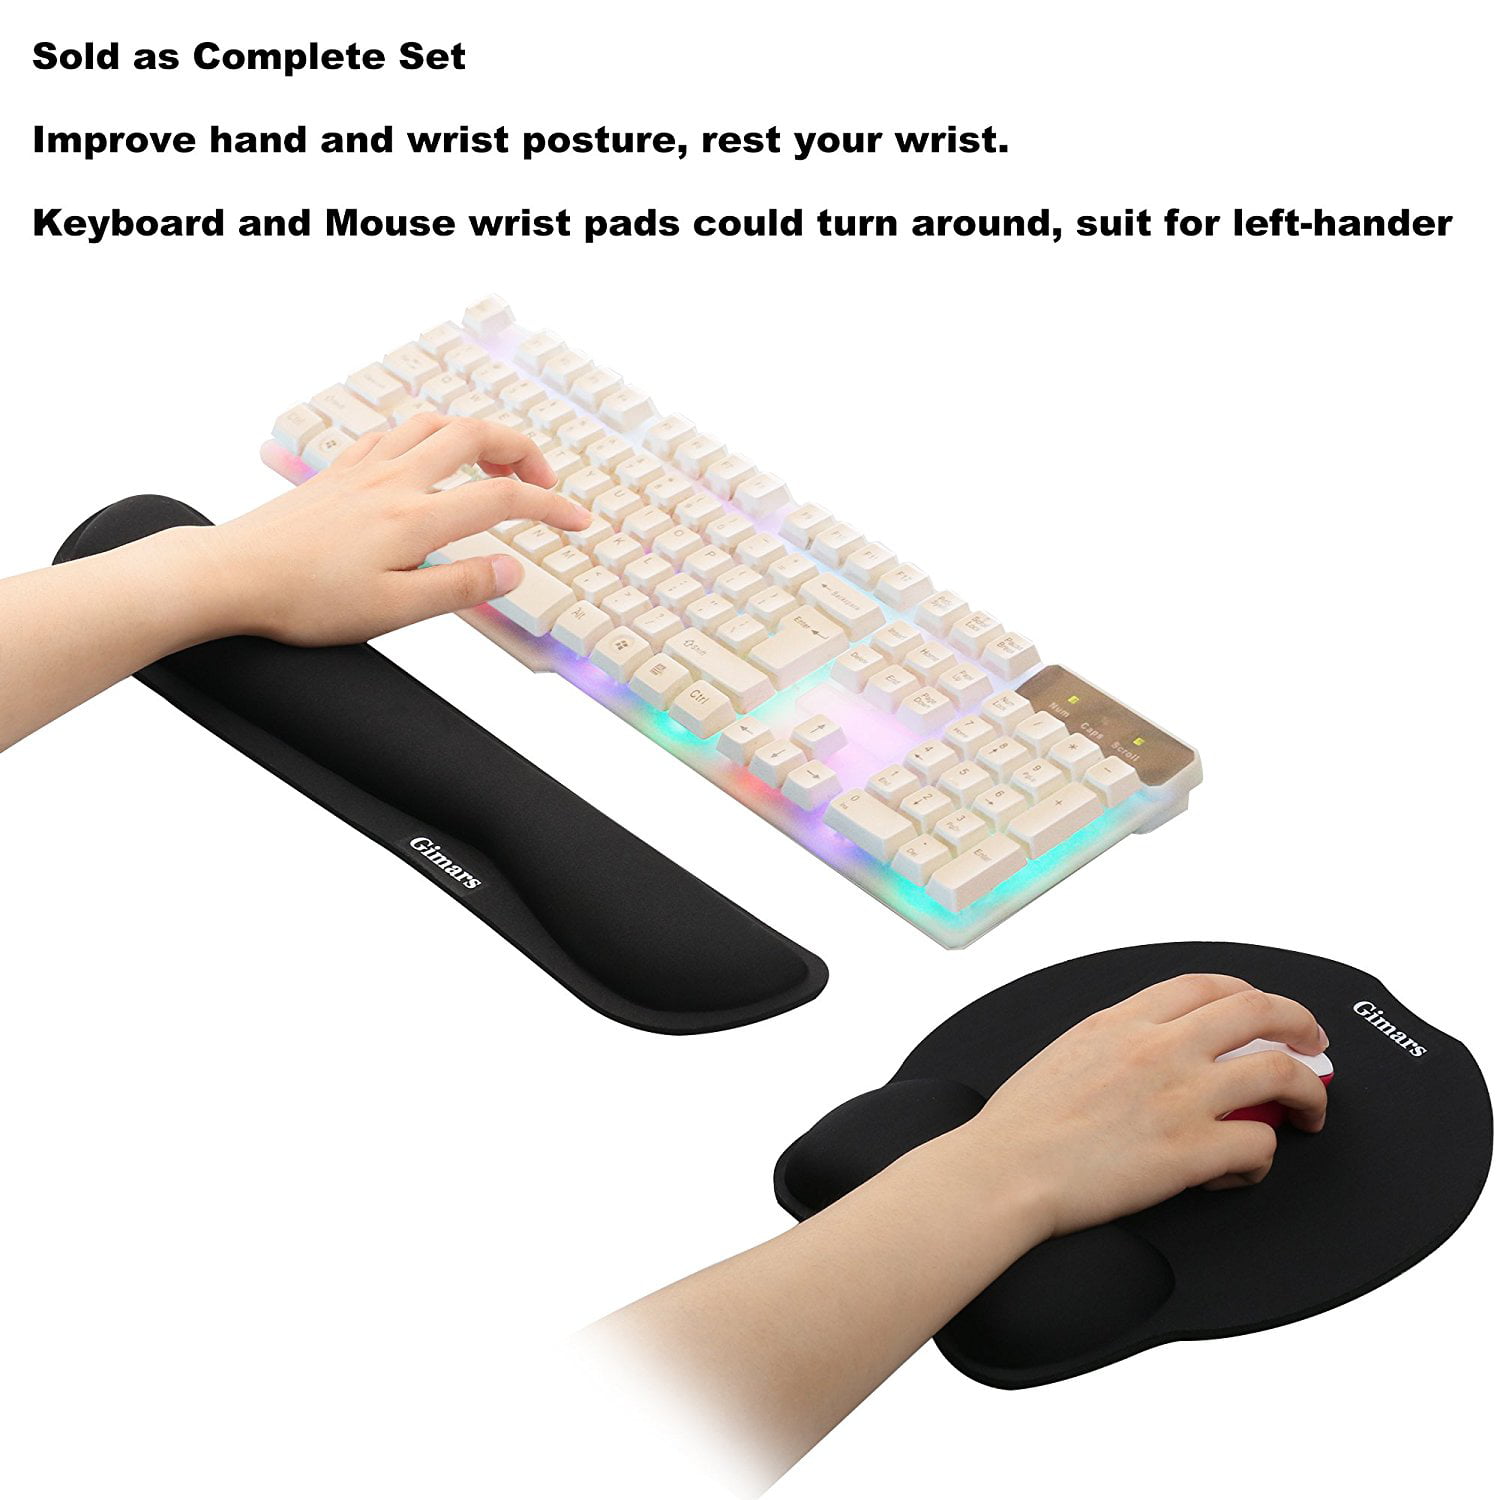 Gaming Office- Baby Sloth Ergonomic Mouse pad with Memory Foam Wrist Cushion & Non Slip Base for Computer Laptop Keyboard Wrist Rest Pad and Mouse Pad Wrist Support Set with Coaster 